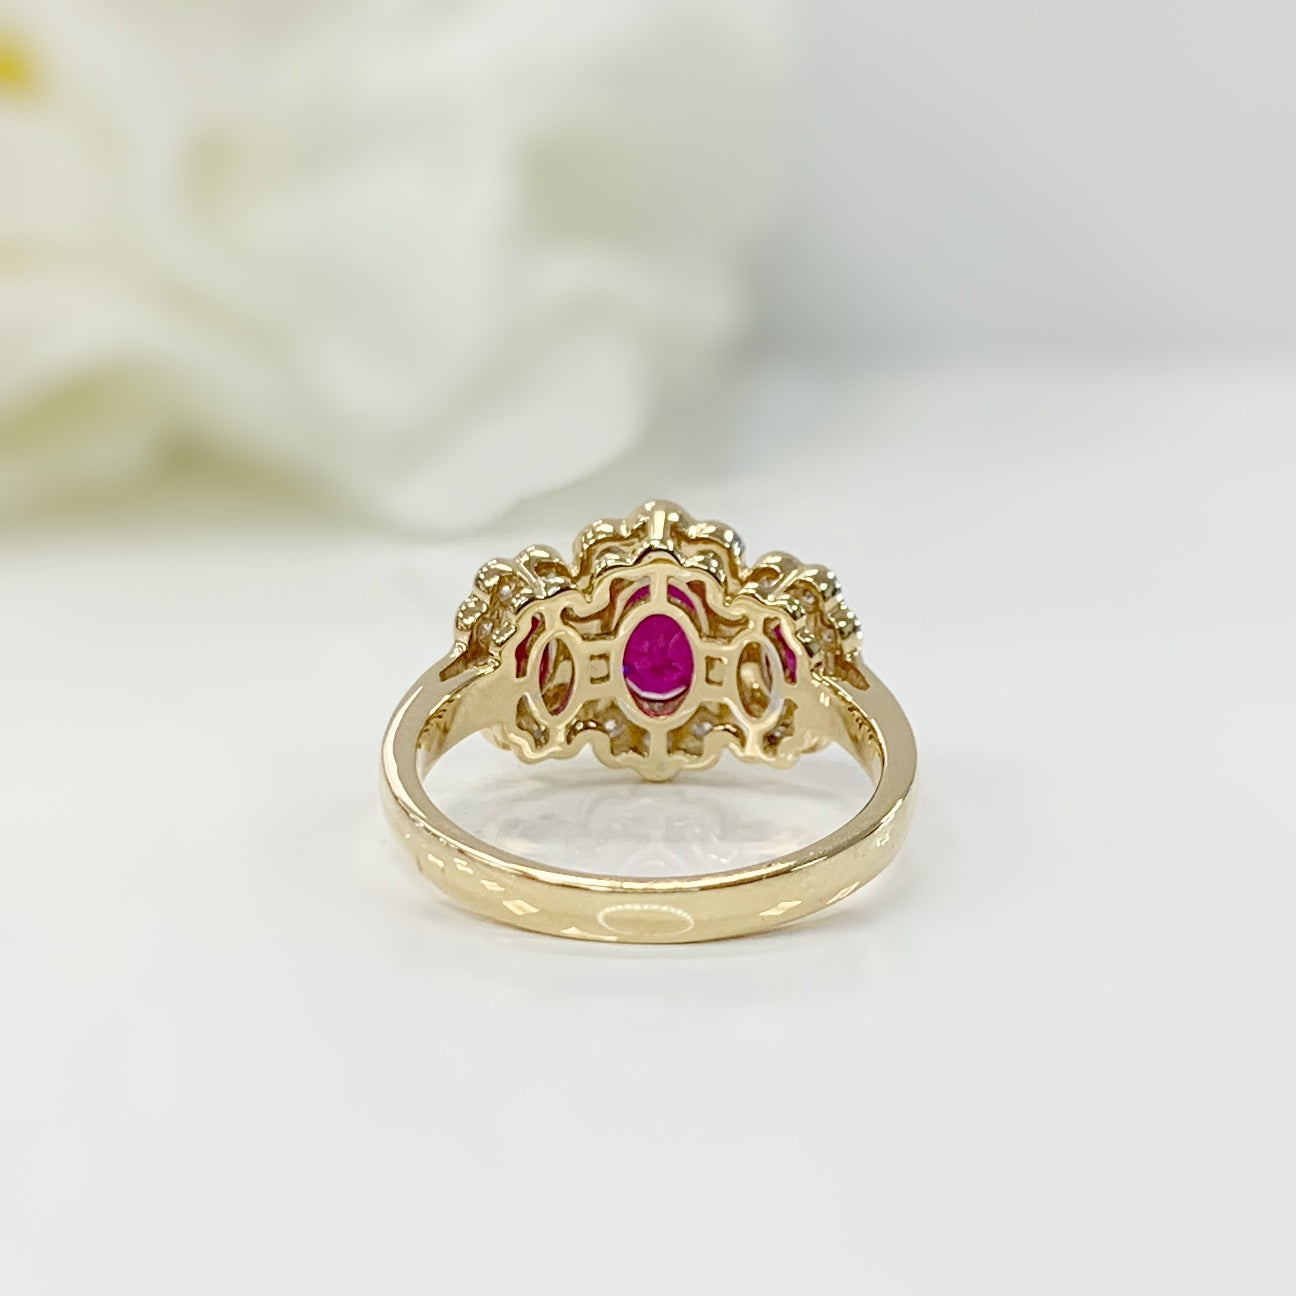 18ct Yellow Gold Ruby And Diamond Trilogy Ring – Size M 1/2